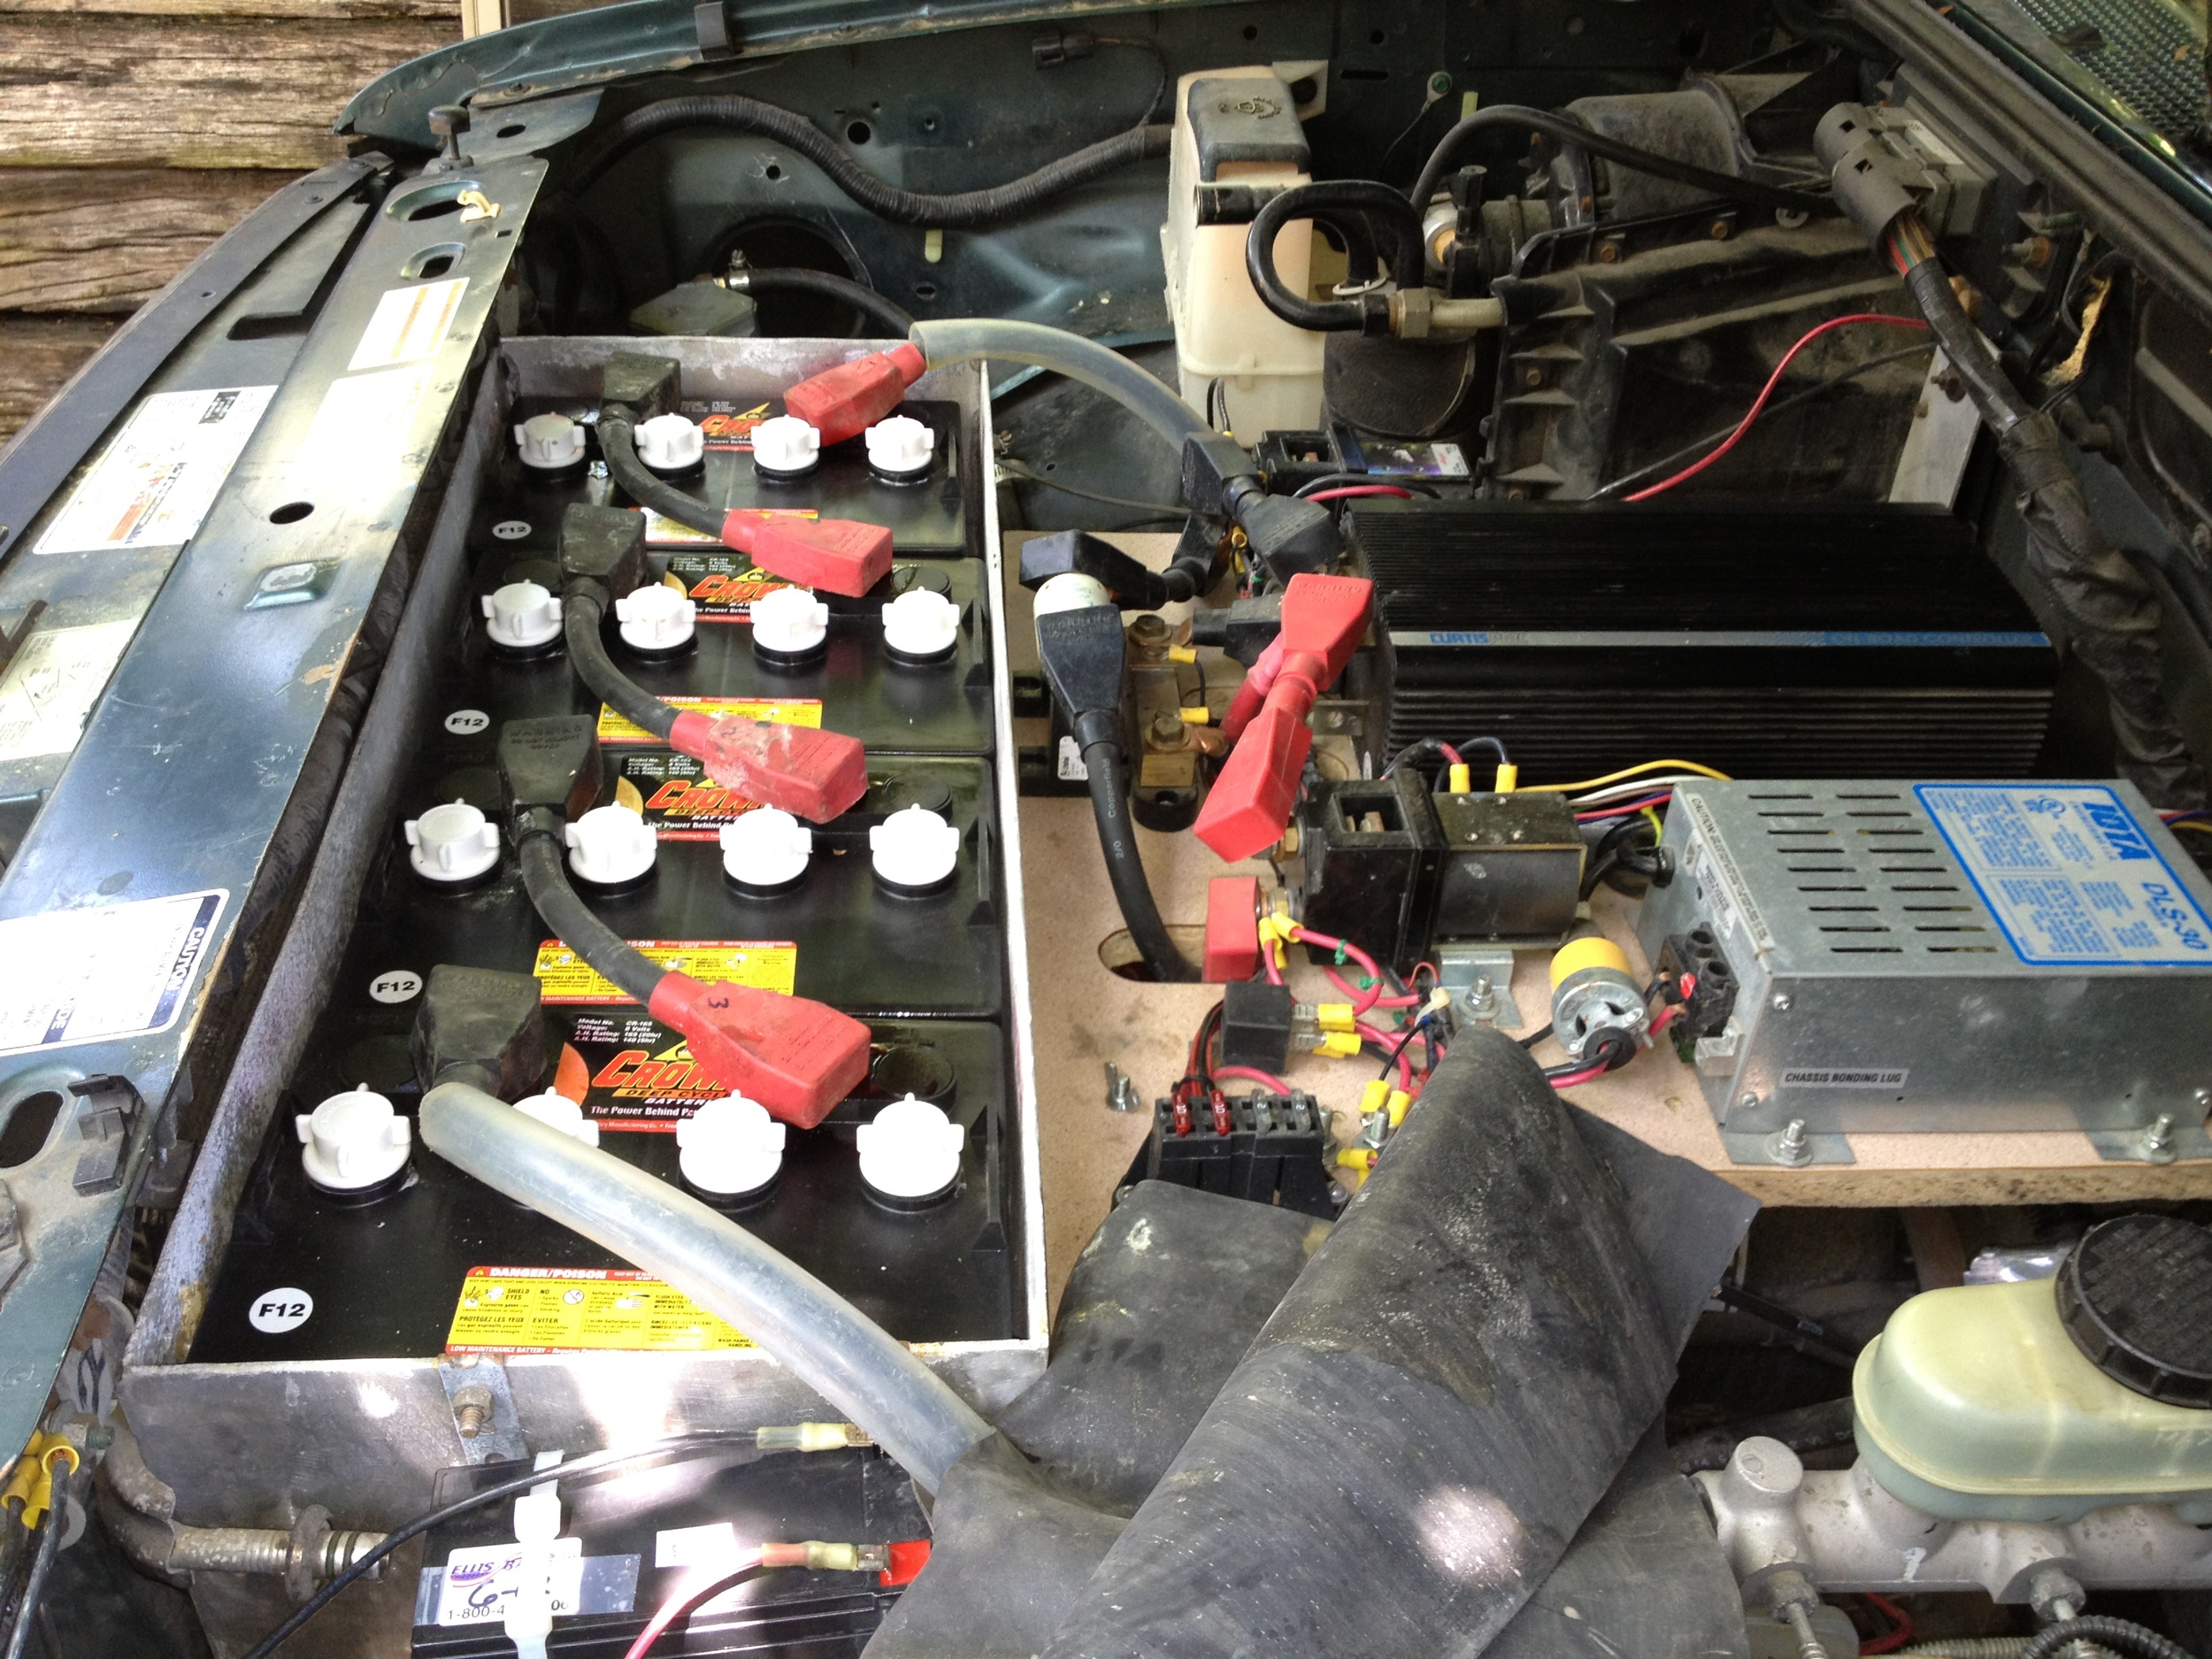  Under the hood of the Electric Ranger 5 years after the conversion with a new battery pack   